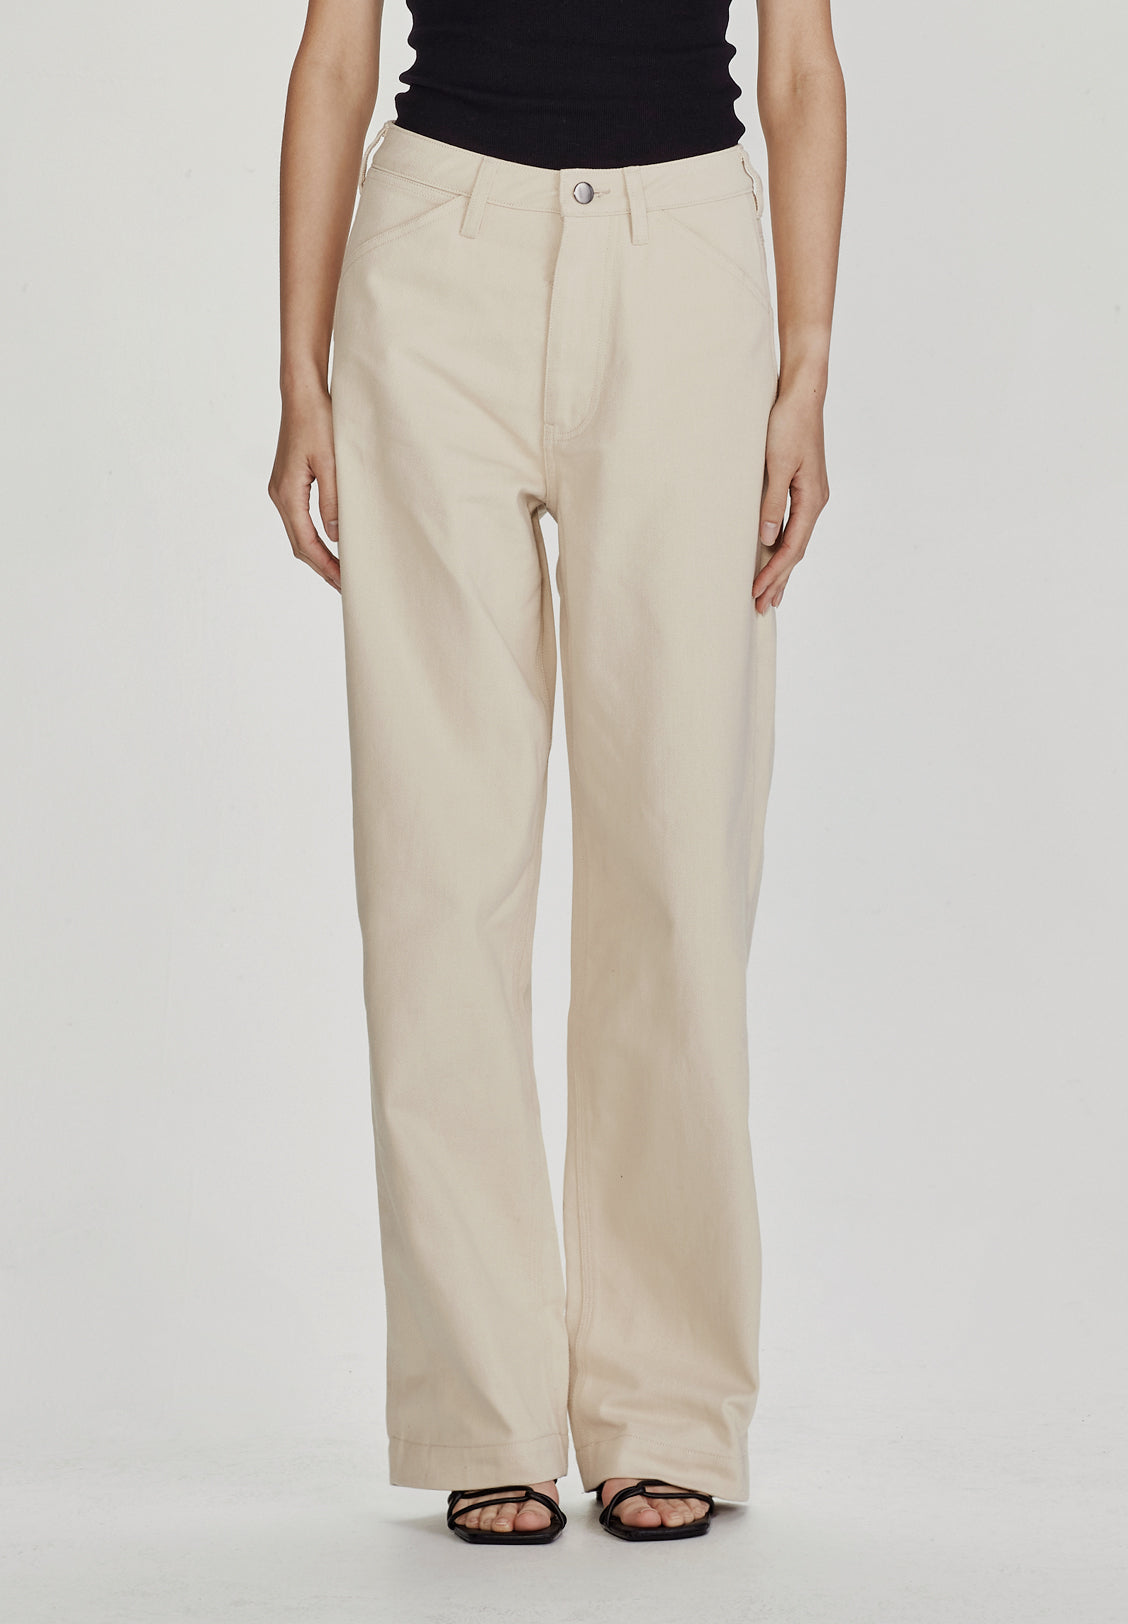 Commoners Women's Drill Pant - Sand